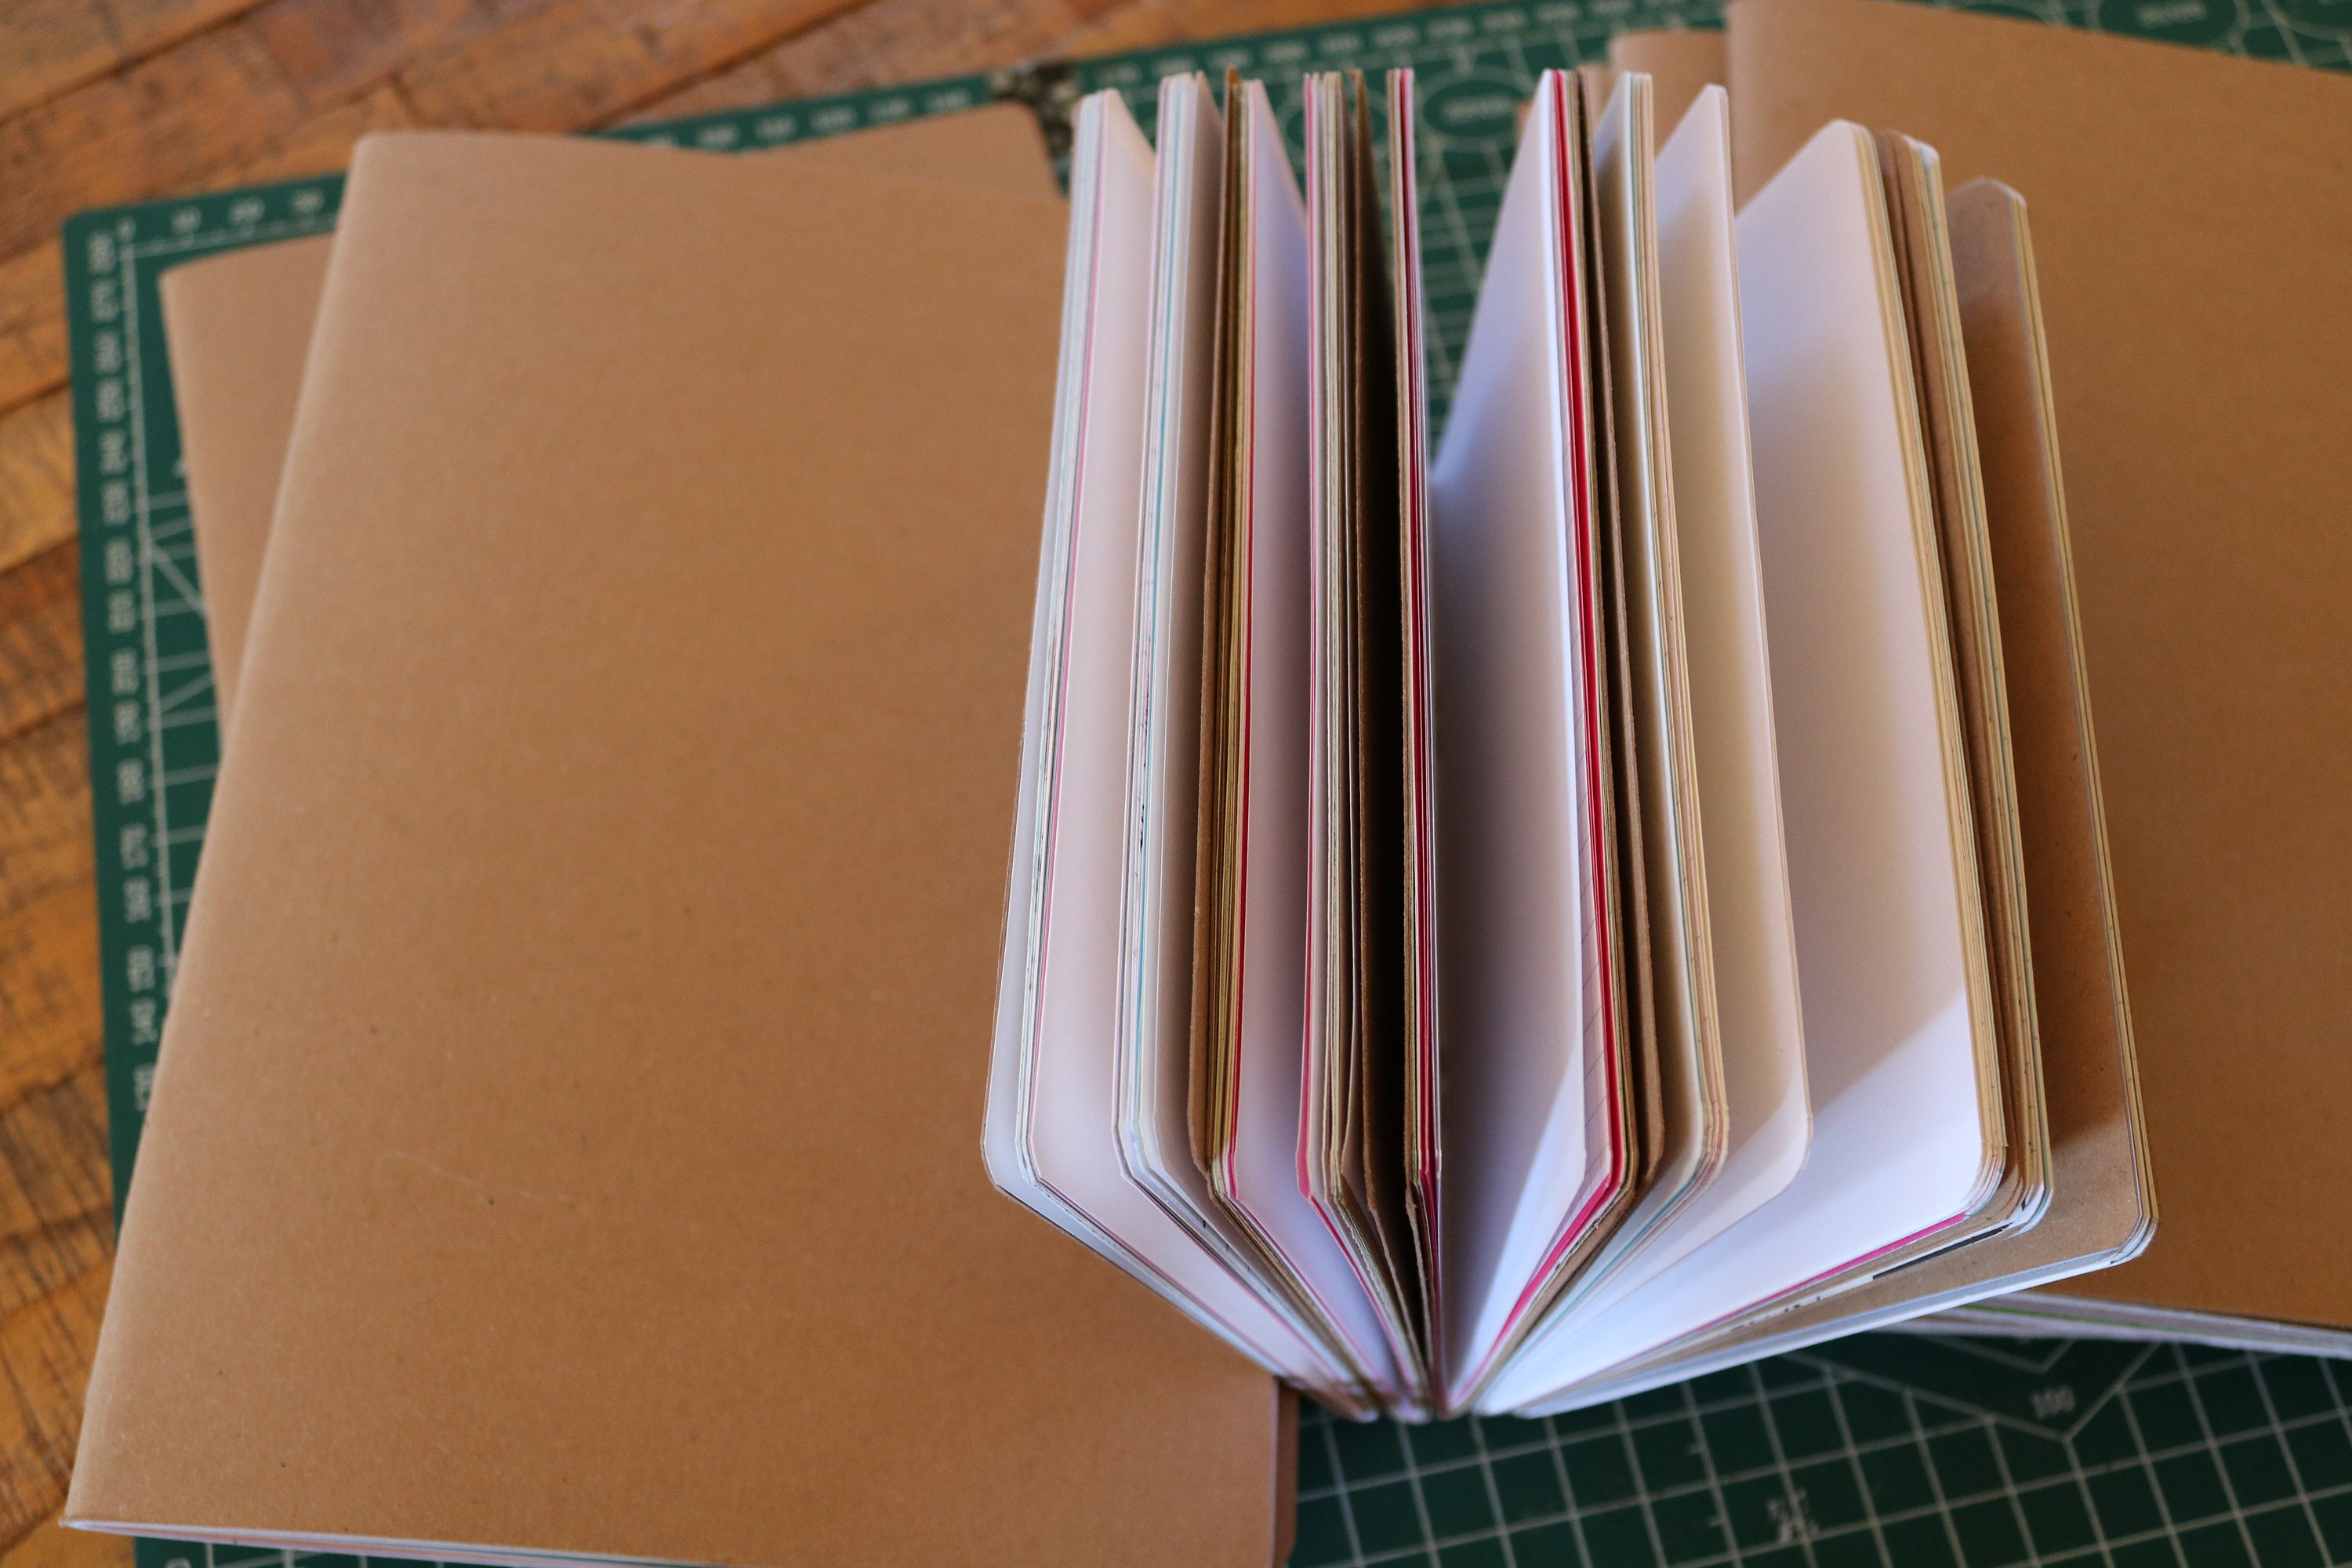 Blank notebook pages refill – The Perfect Notebook